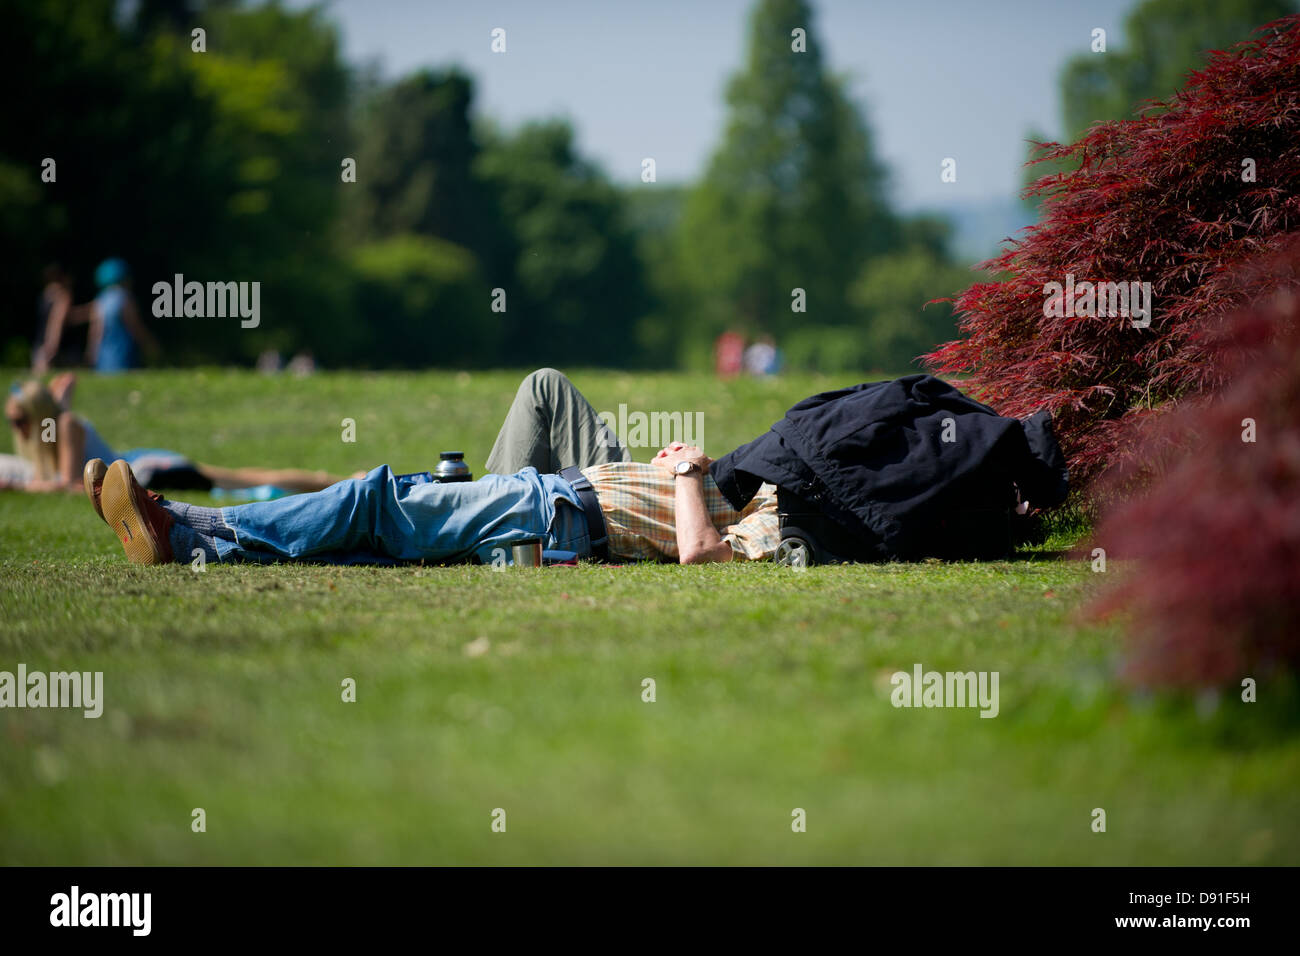 A man protects his head from the sun while sunbathing in Bute Park, Cardiff, UK, on a hot summer's day. Stock Photo